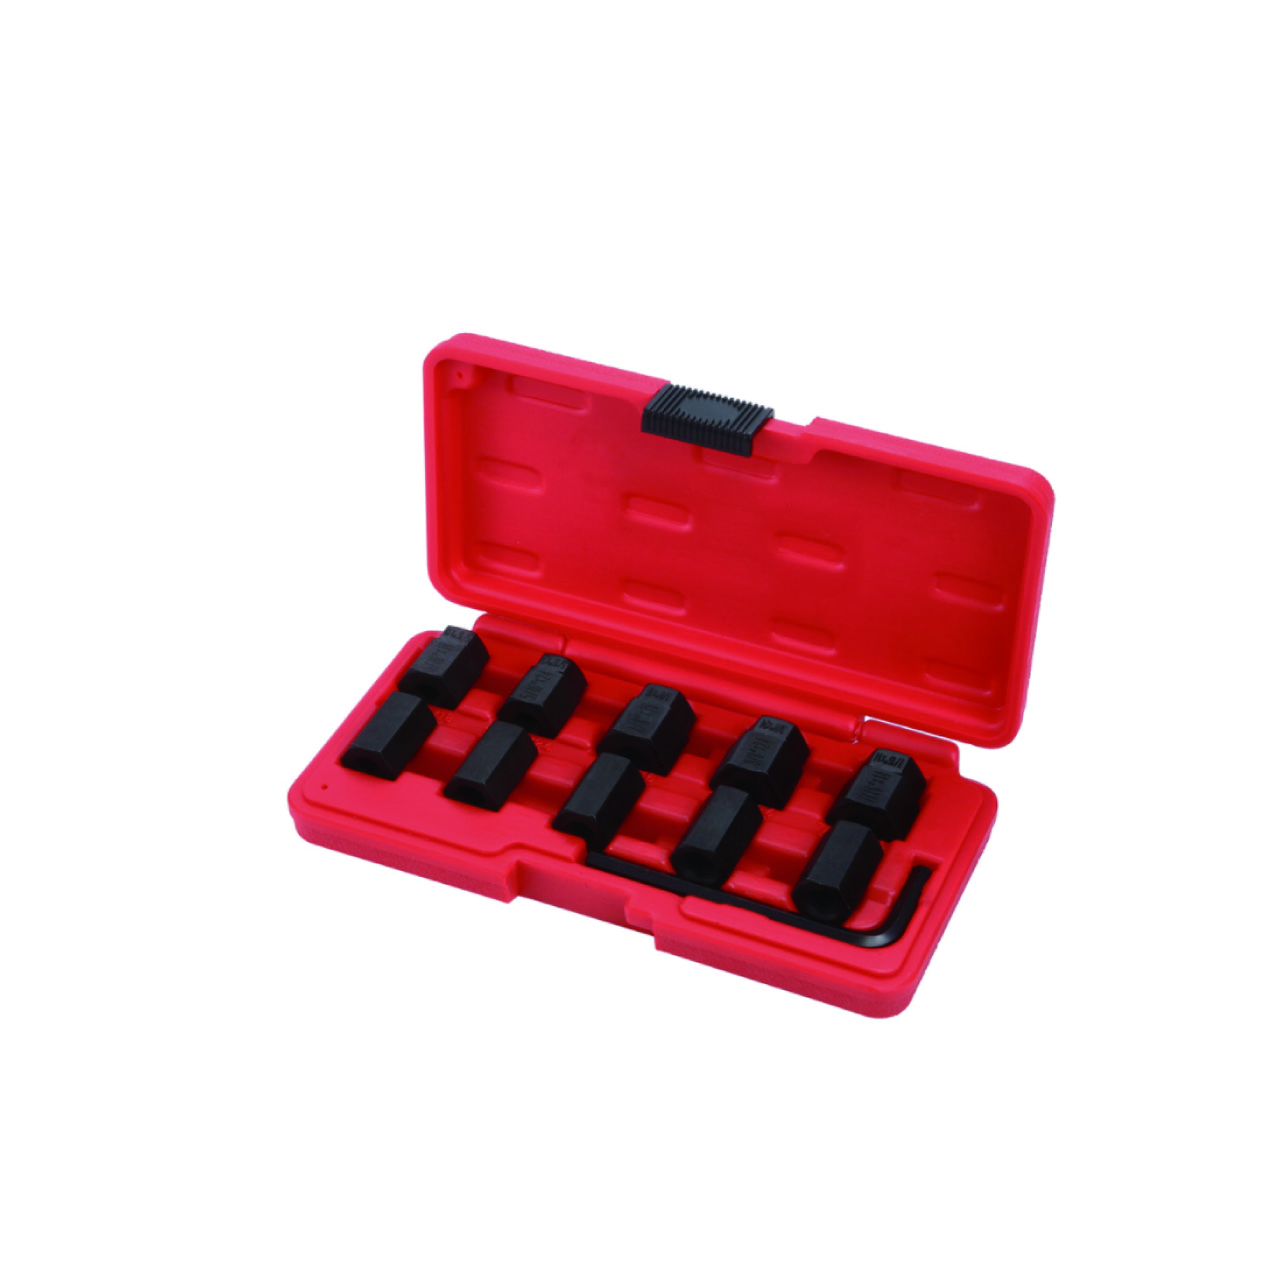 7pcs Stud Remover and Installer Set (SAE)